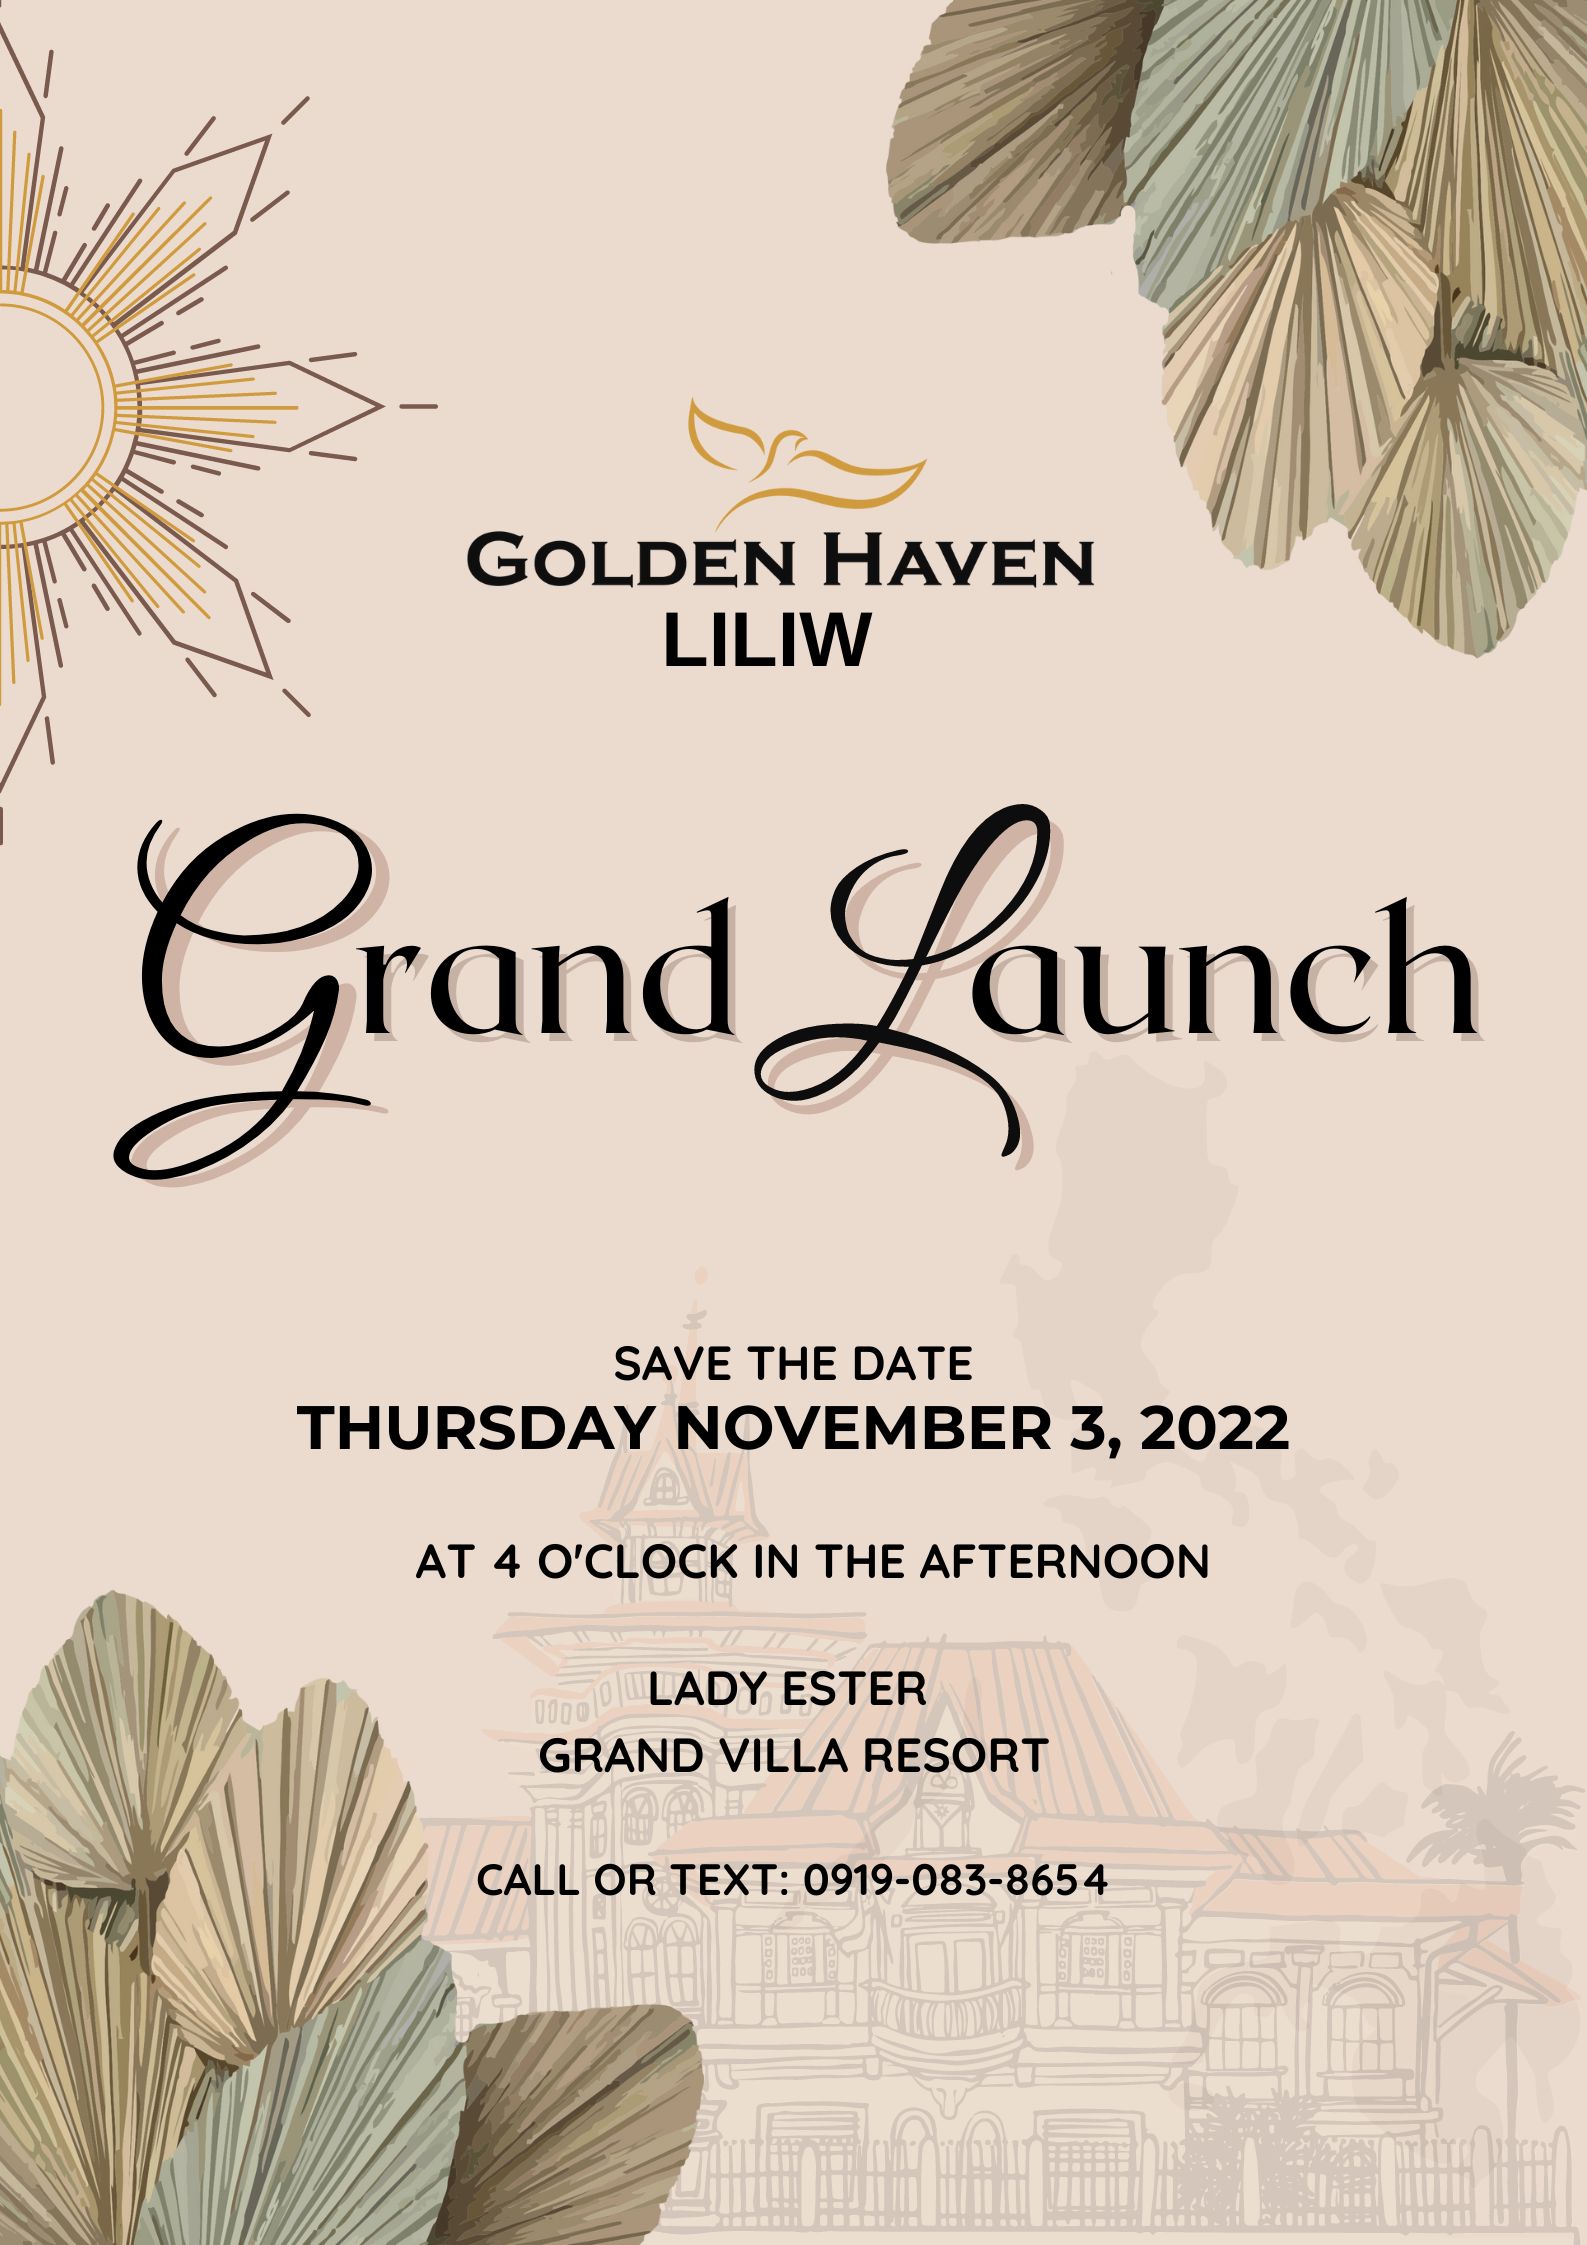 Golden Haven Liliw The Grand Launch